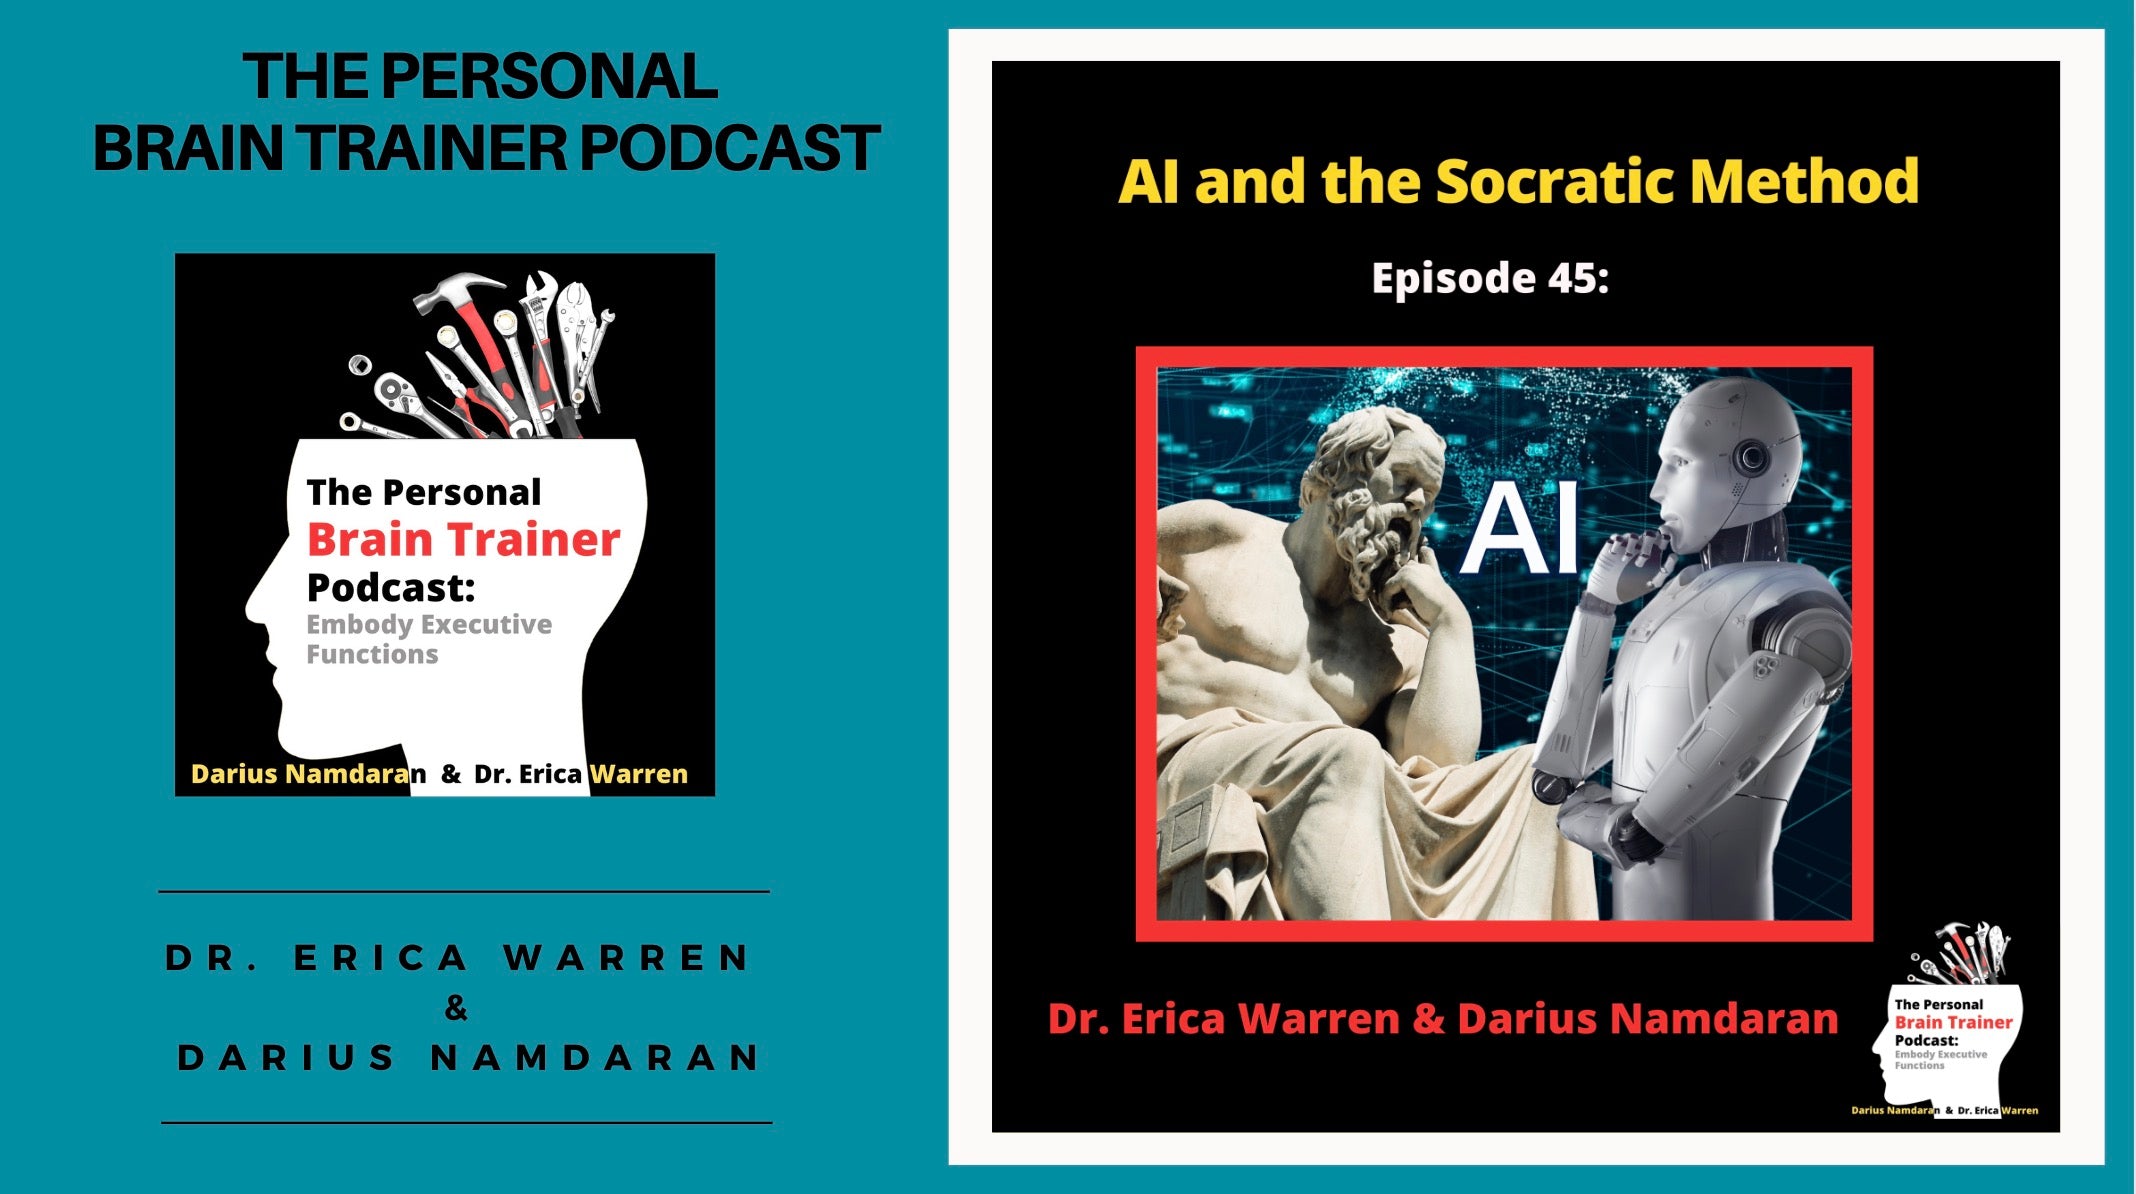 AI and the Socratic Method podcast episode